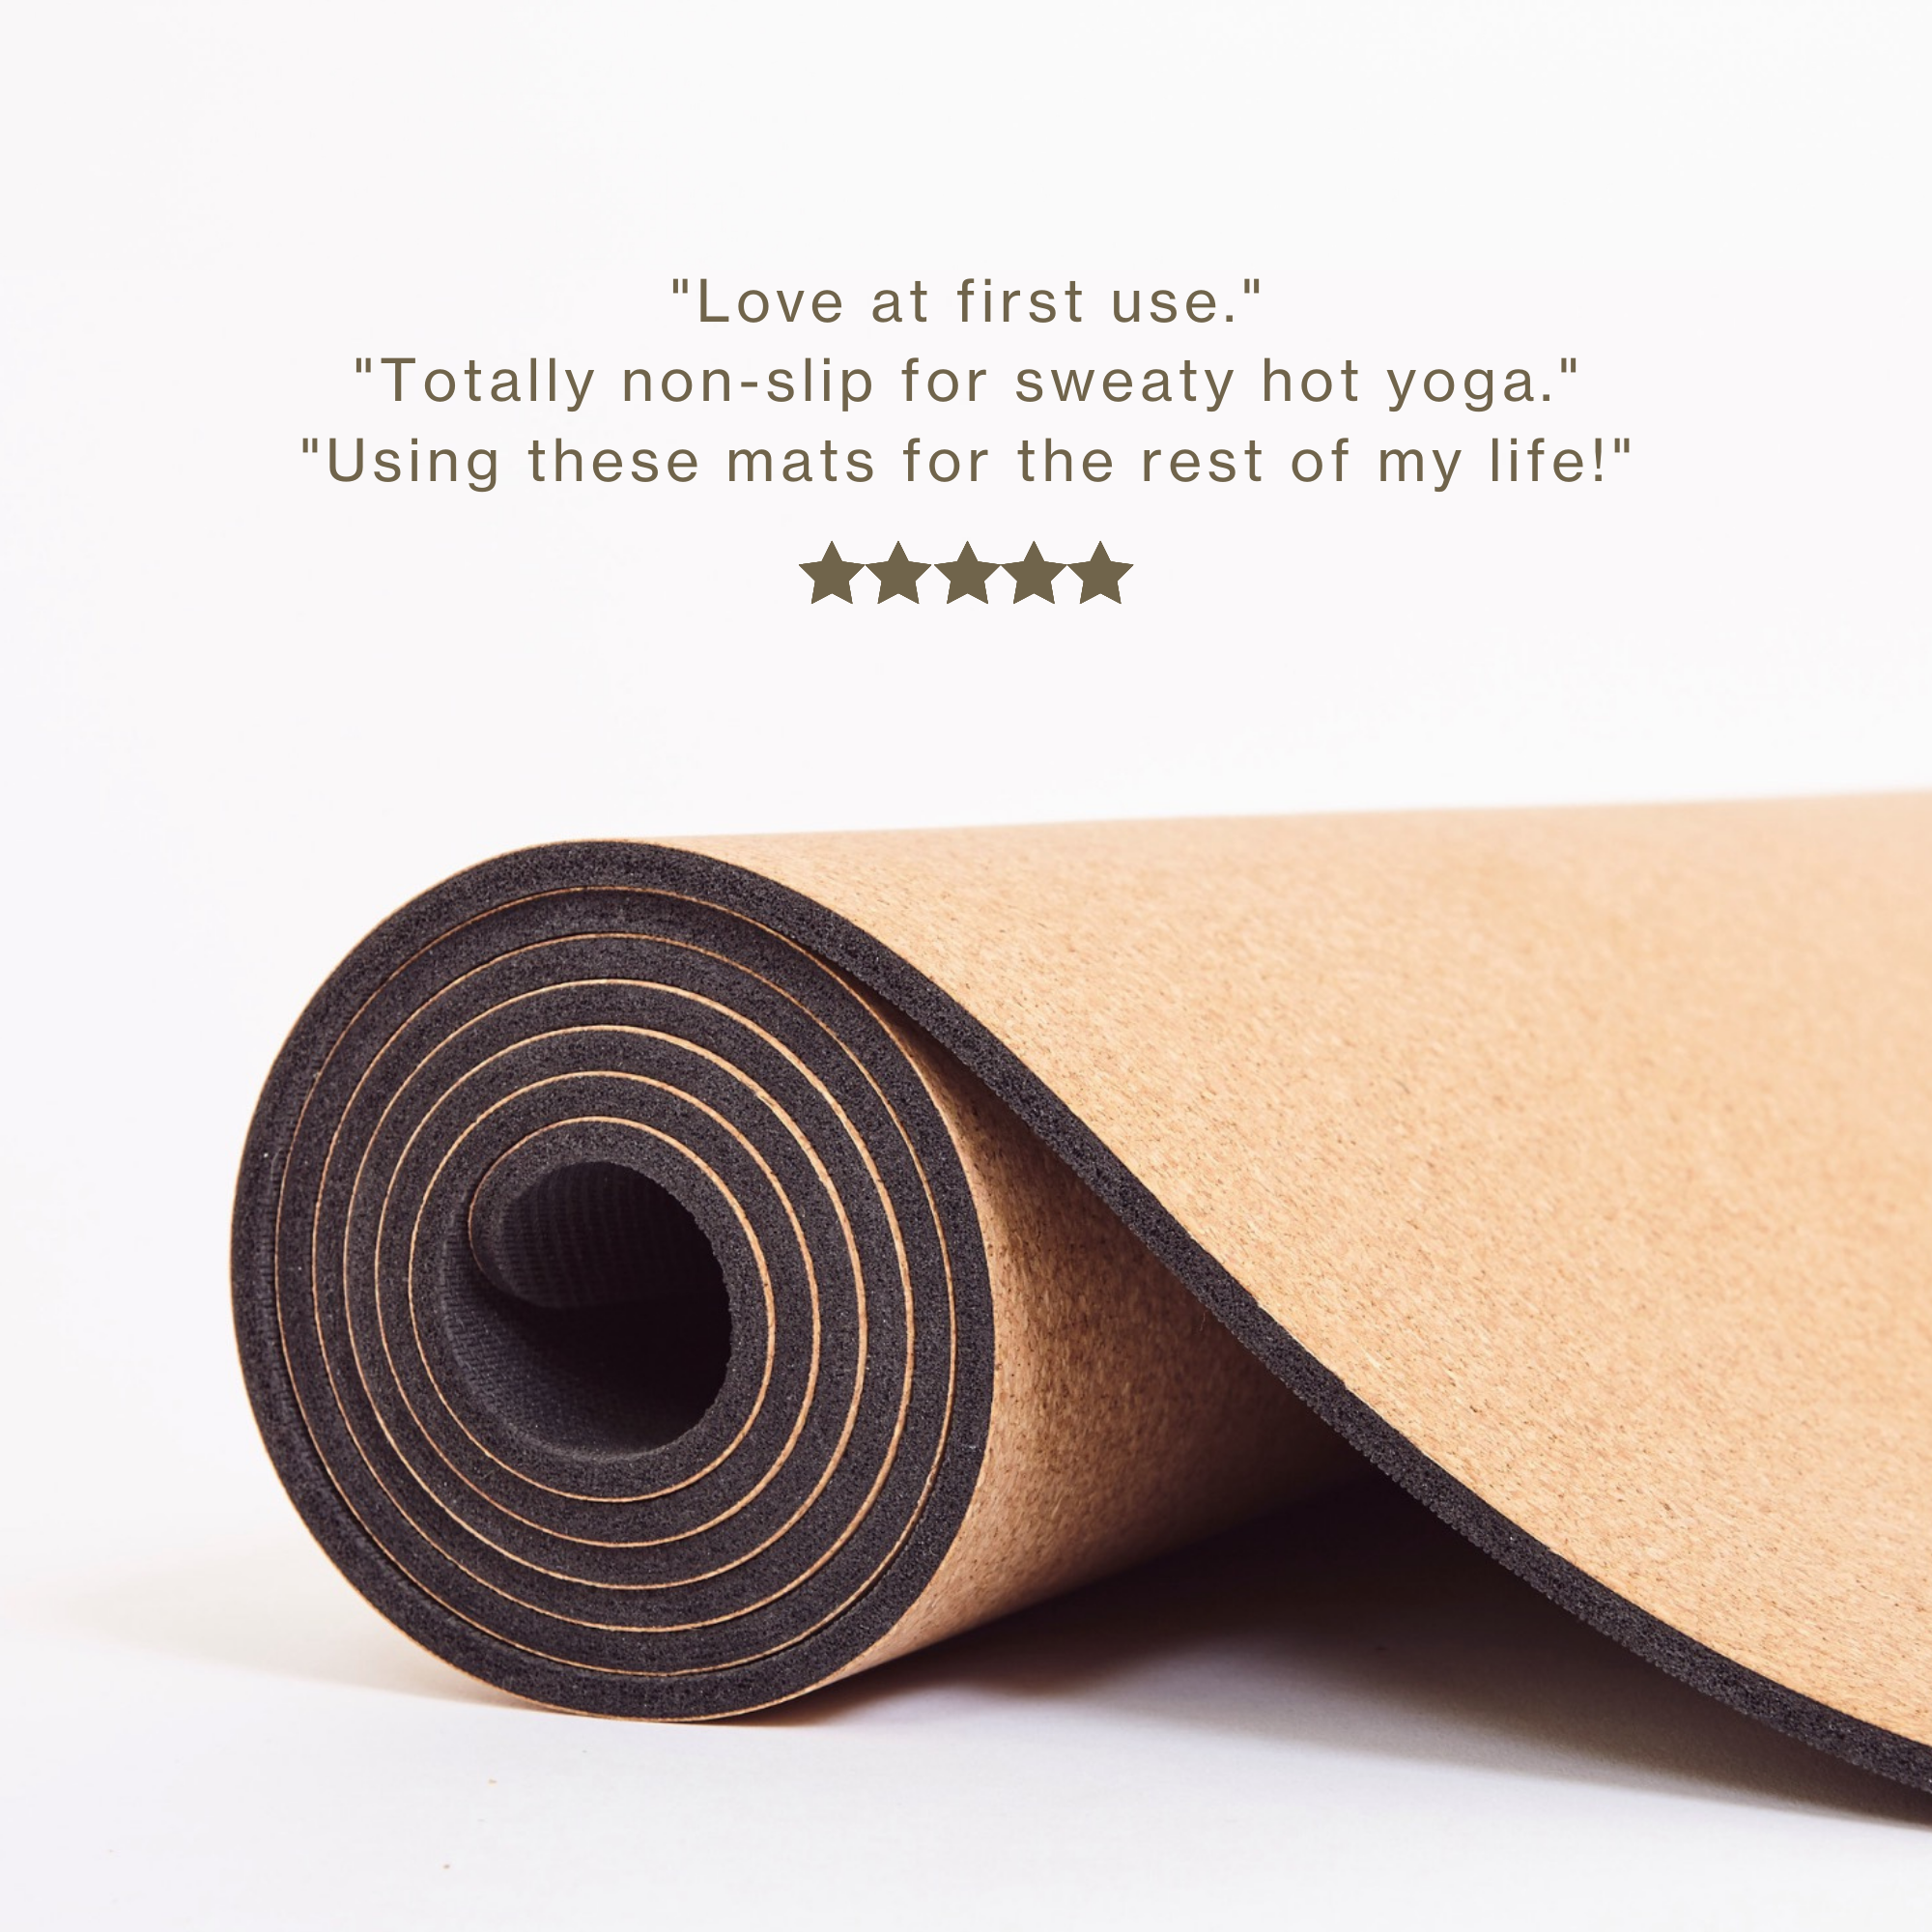 Eco Yoga Mats  Bestselling Non-Slip Yoga Mats for Sale – Complete